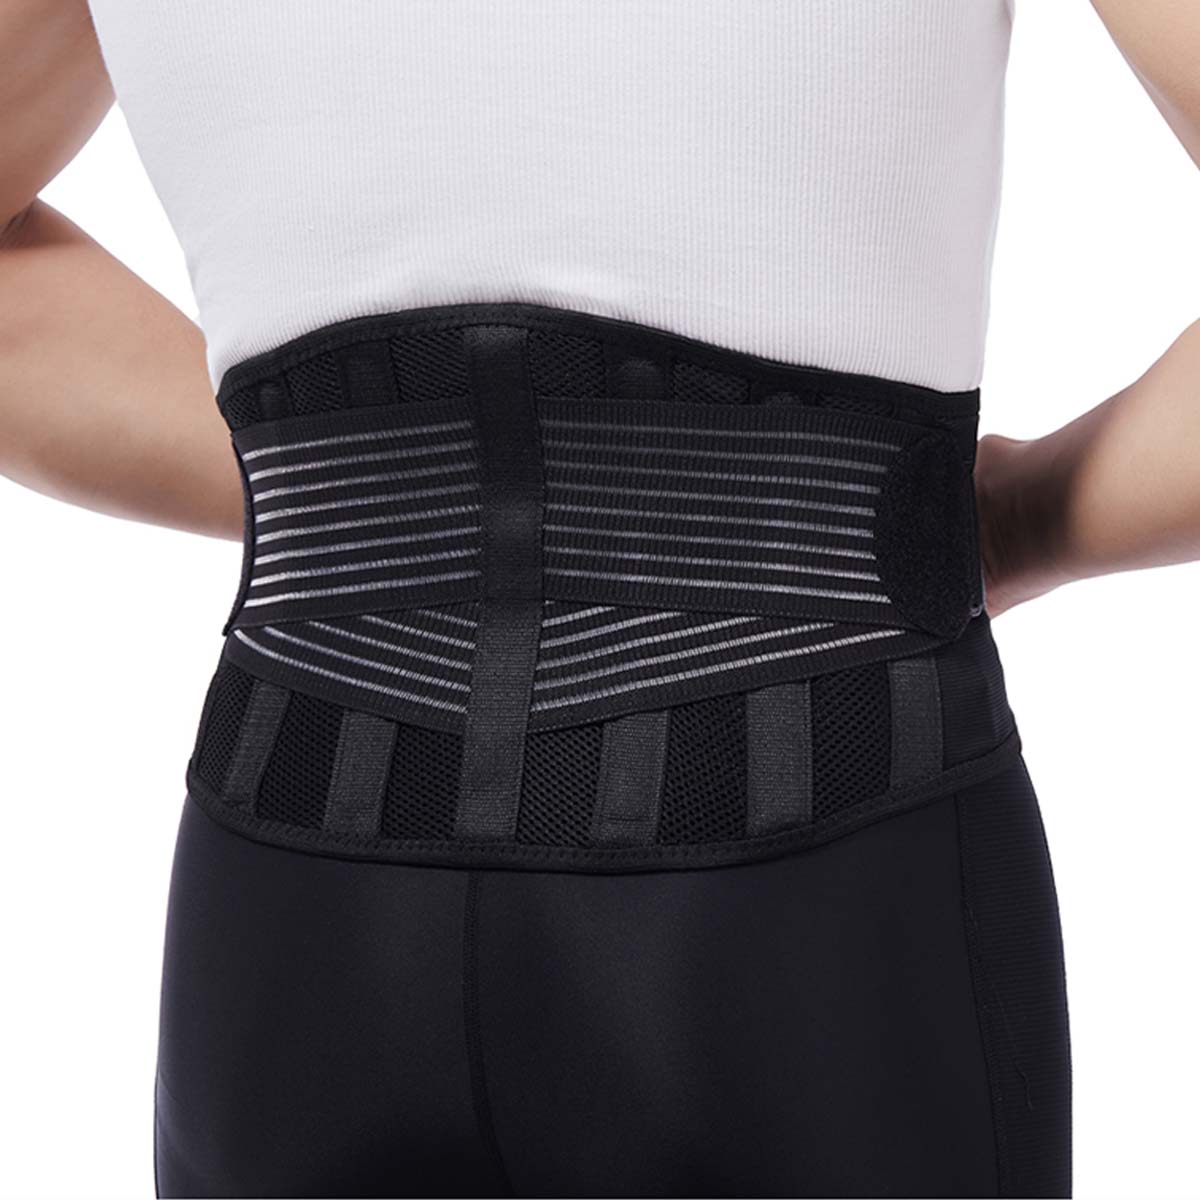 9-inch Breathable Lumbar Support with 4 plastic stays - Medigenix